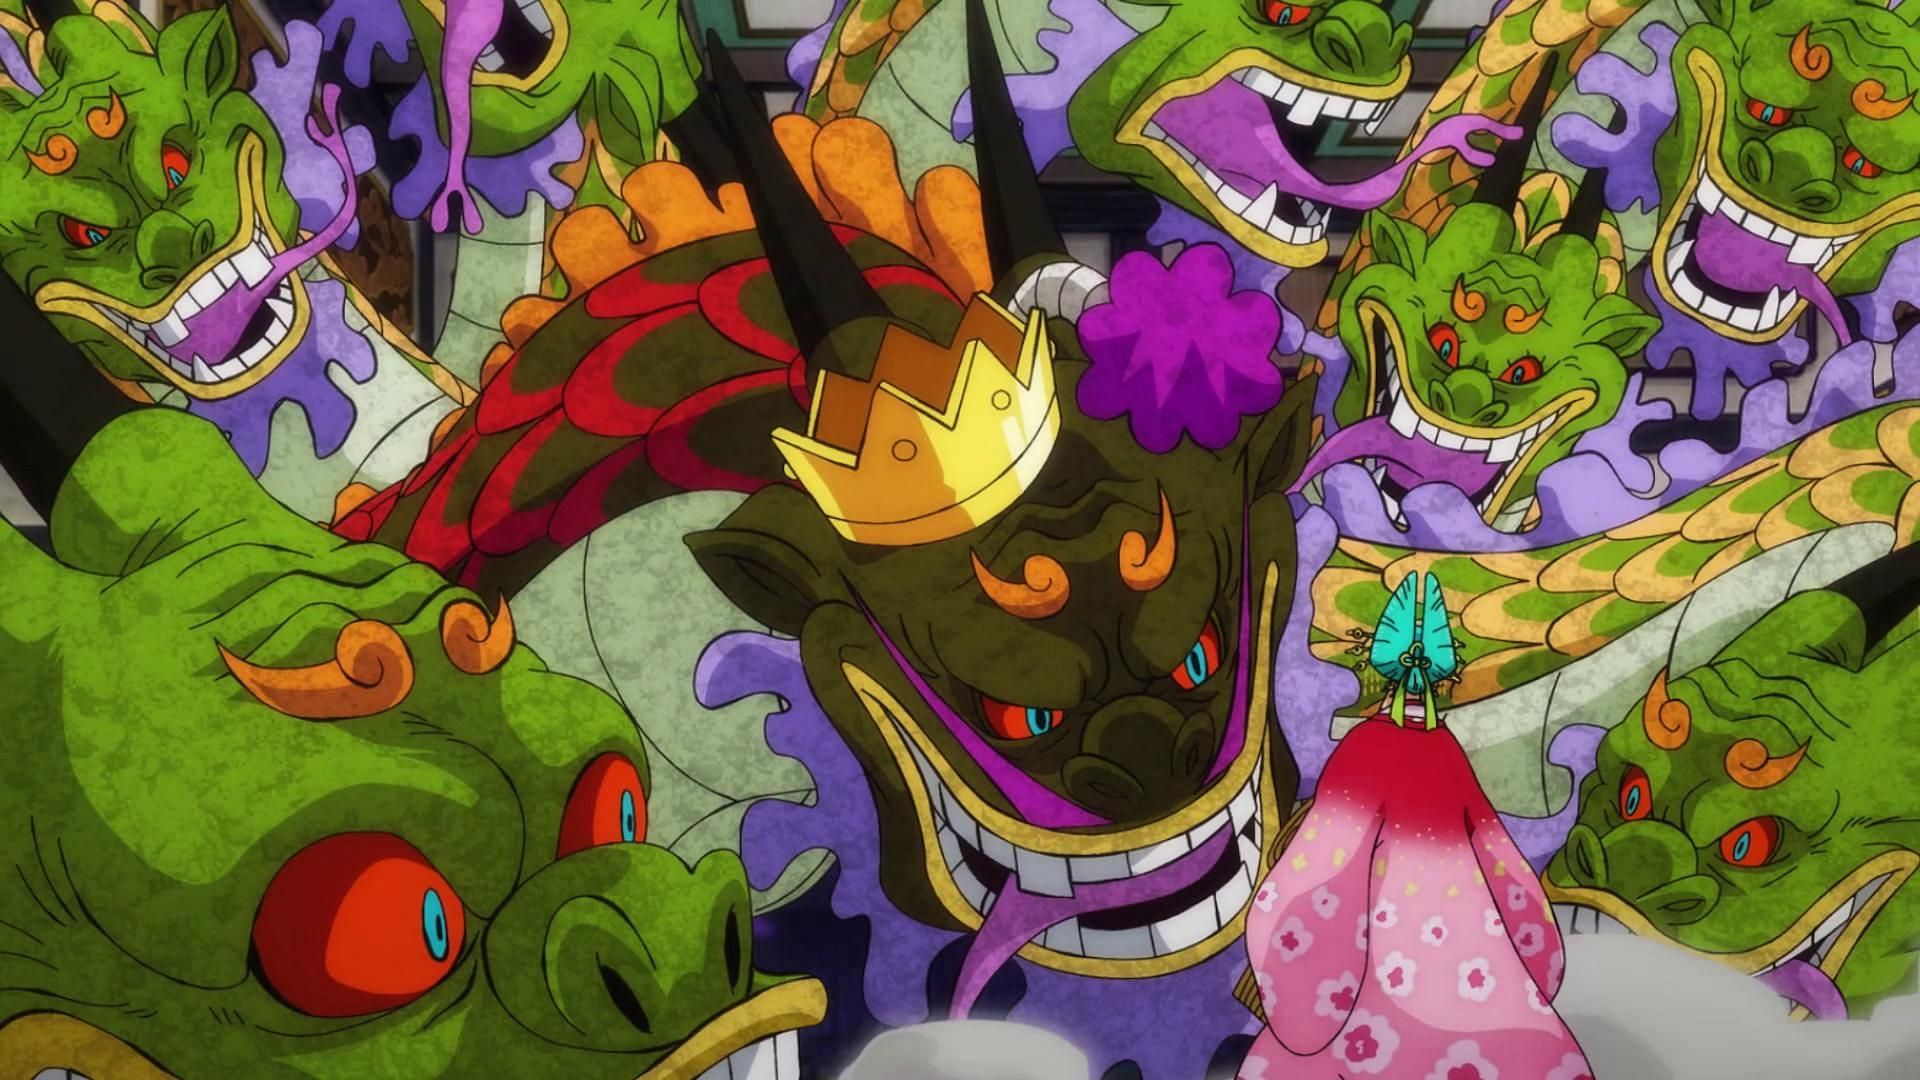 One Piece: 5 Most Powerful Mythical Zoan Devil Fruit Users Except